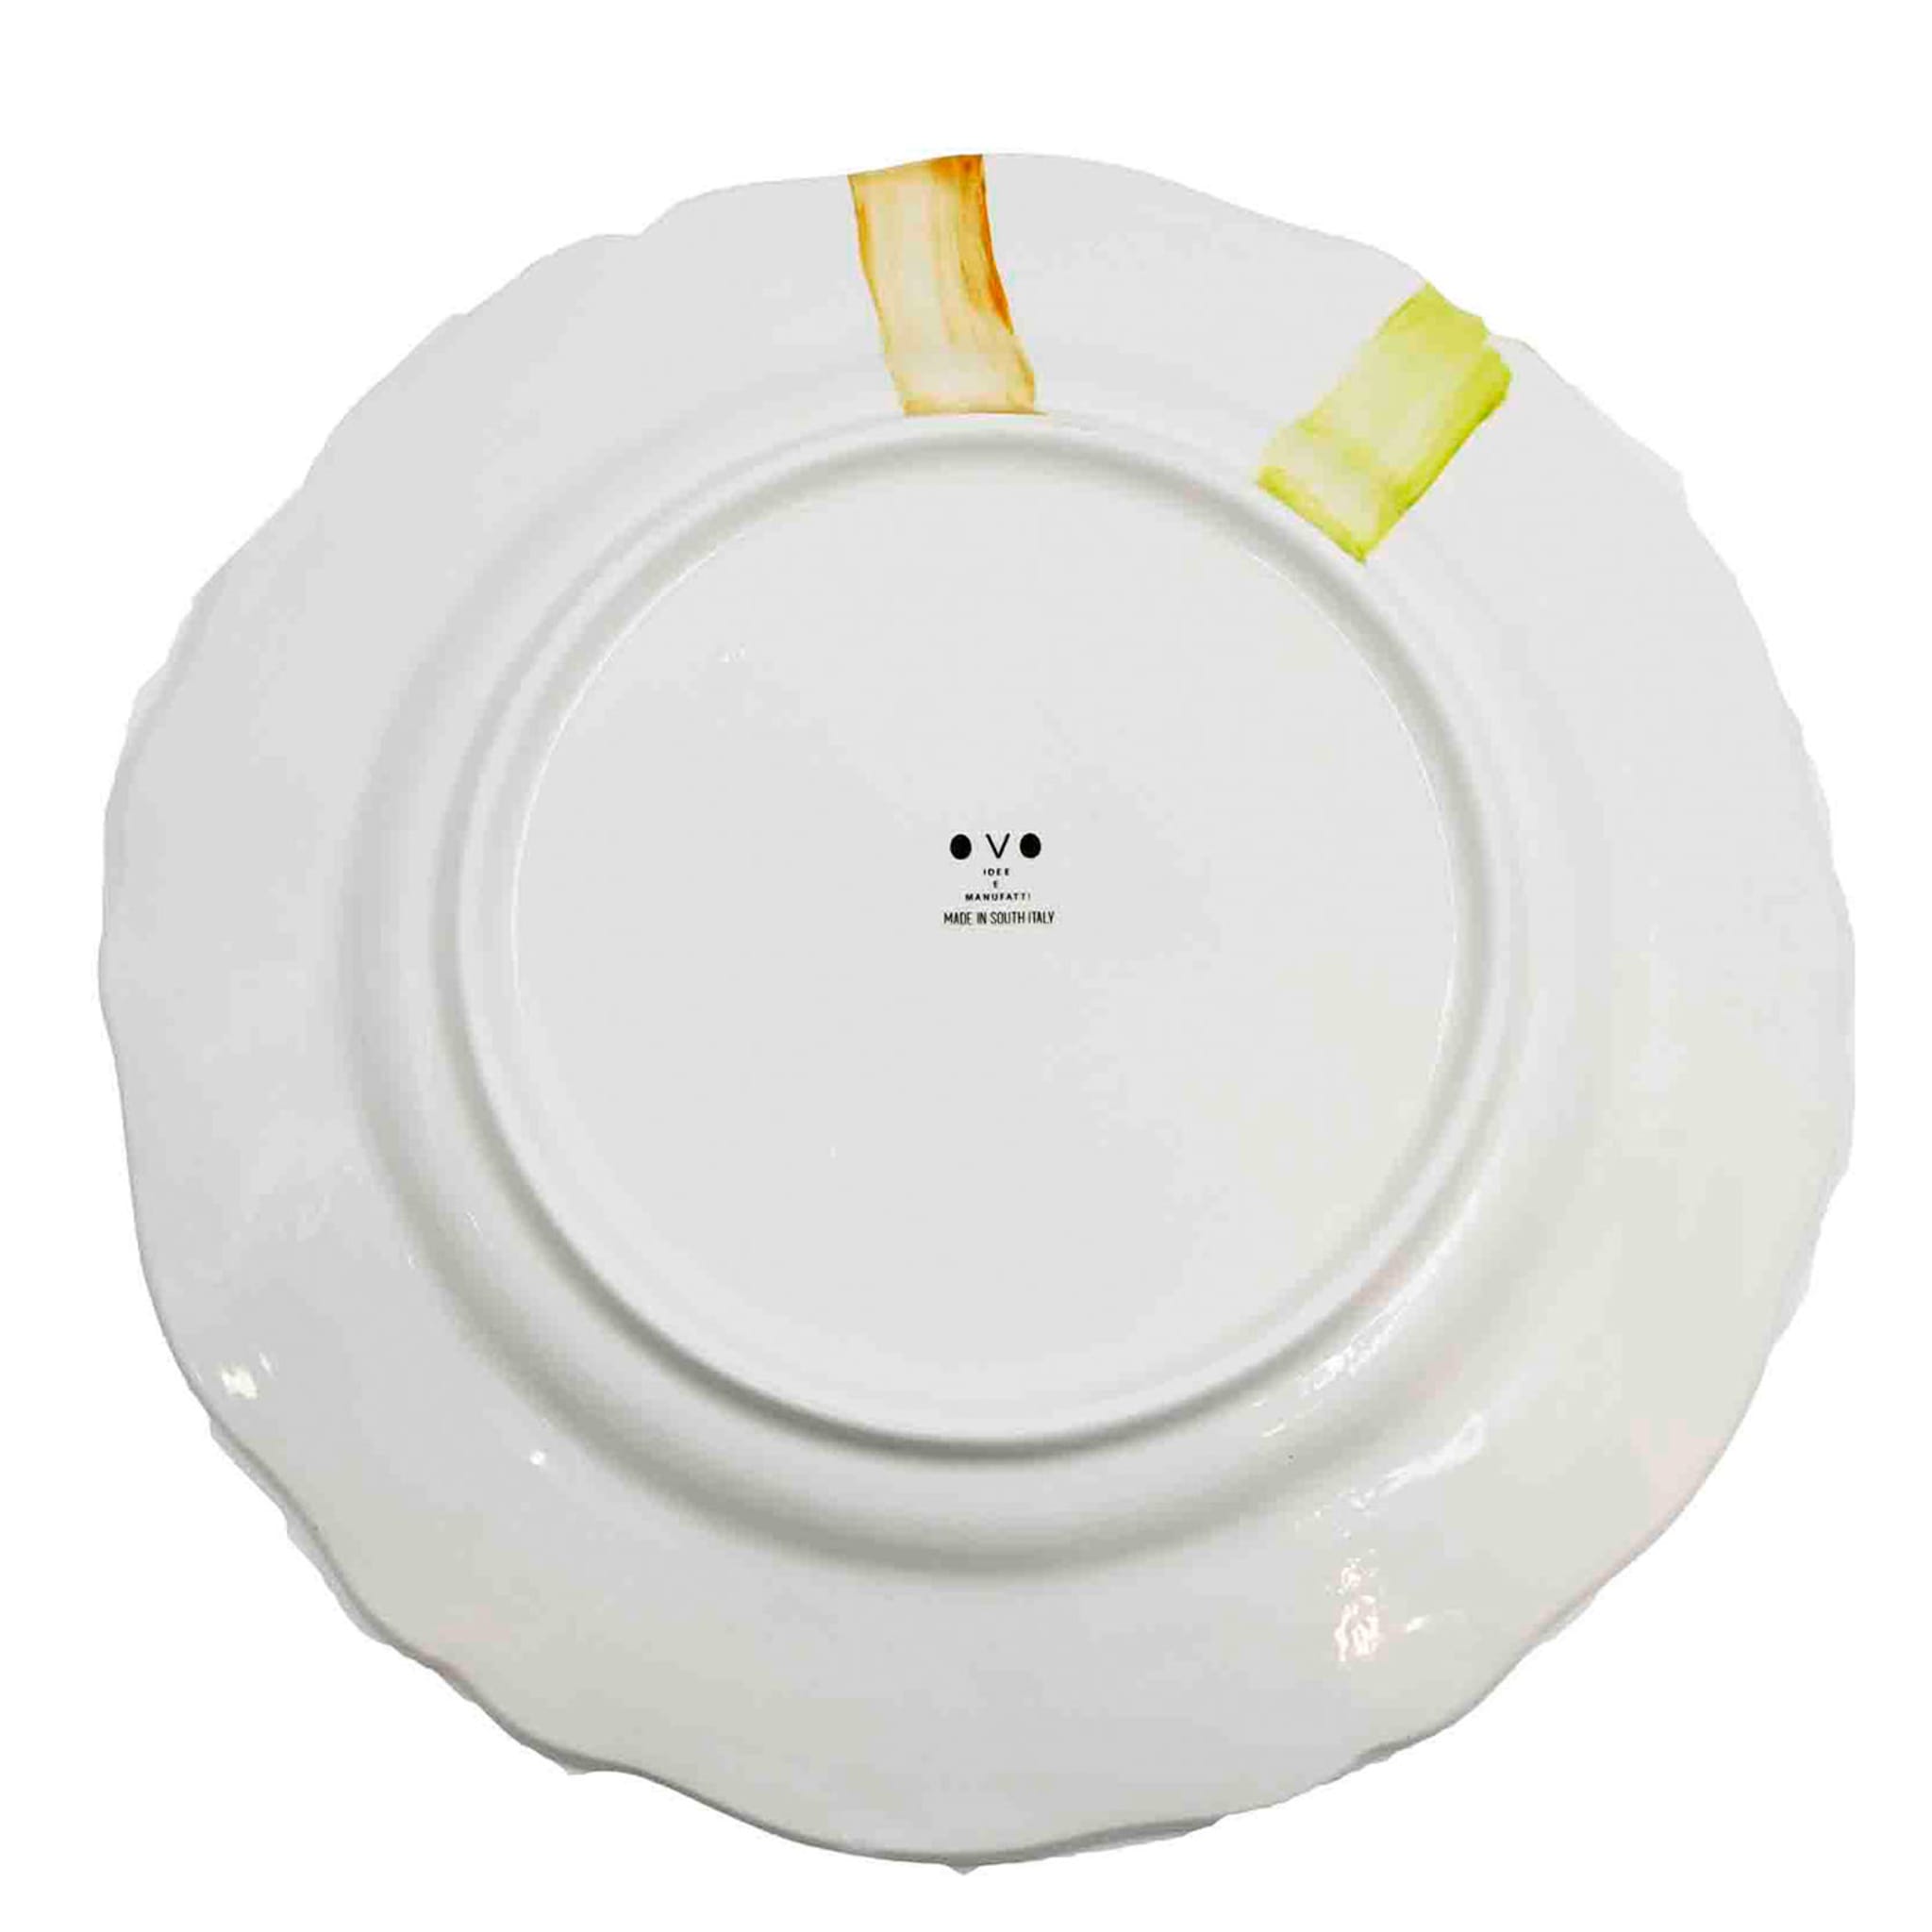 Lime & Mustard Brushstrokes White Charger Plate - Alternative view 1